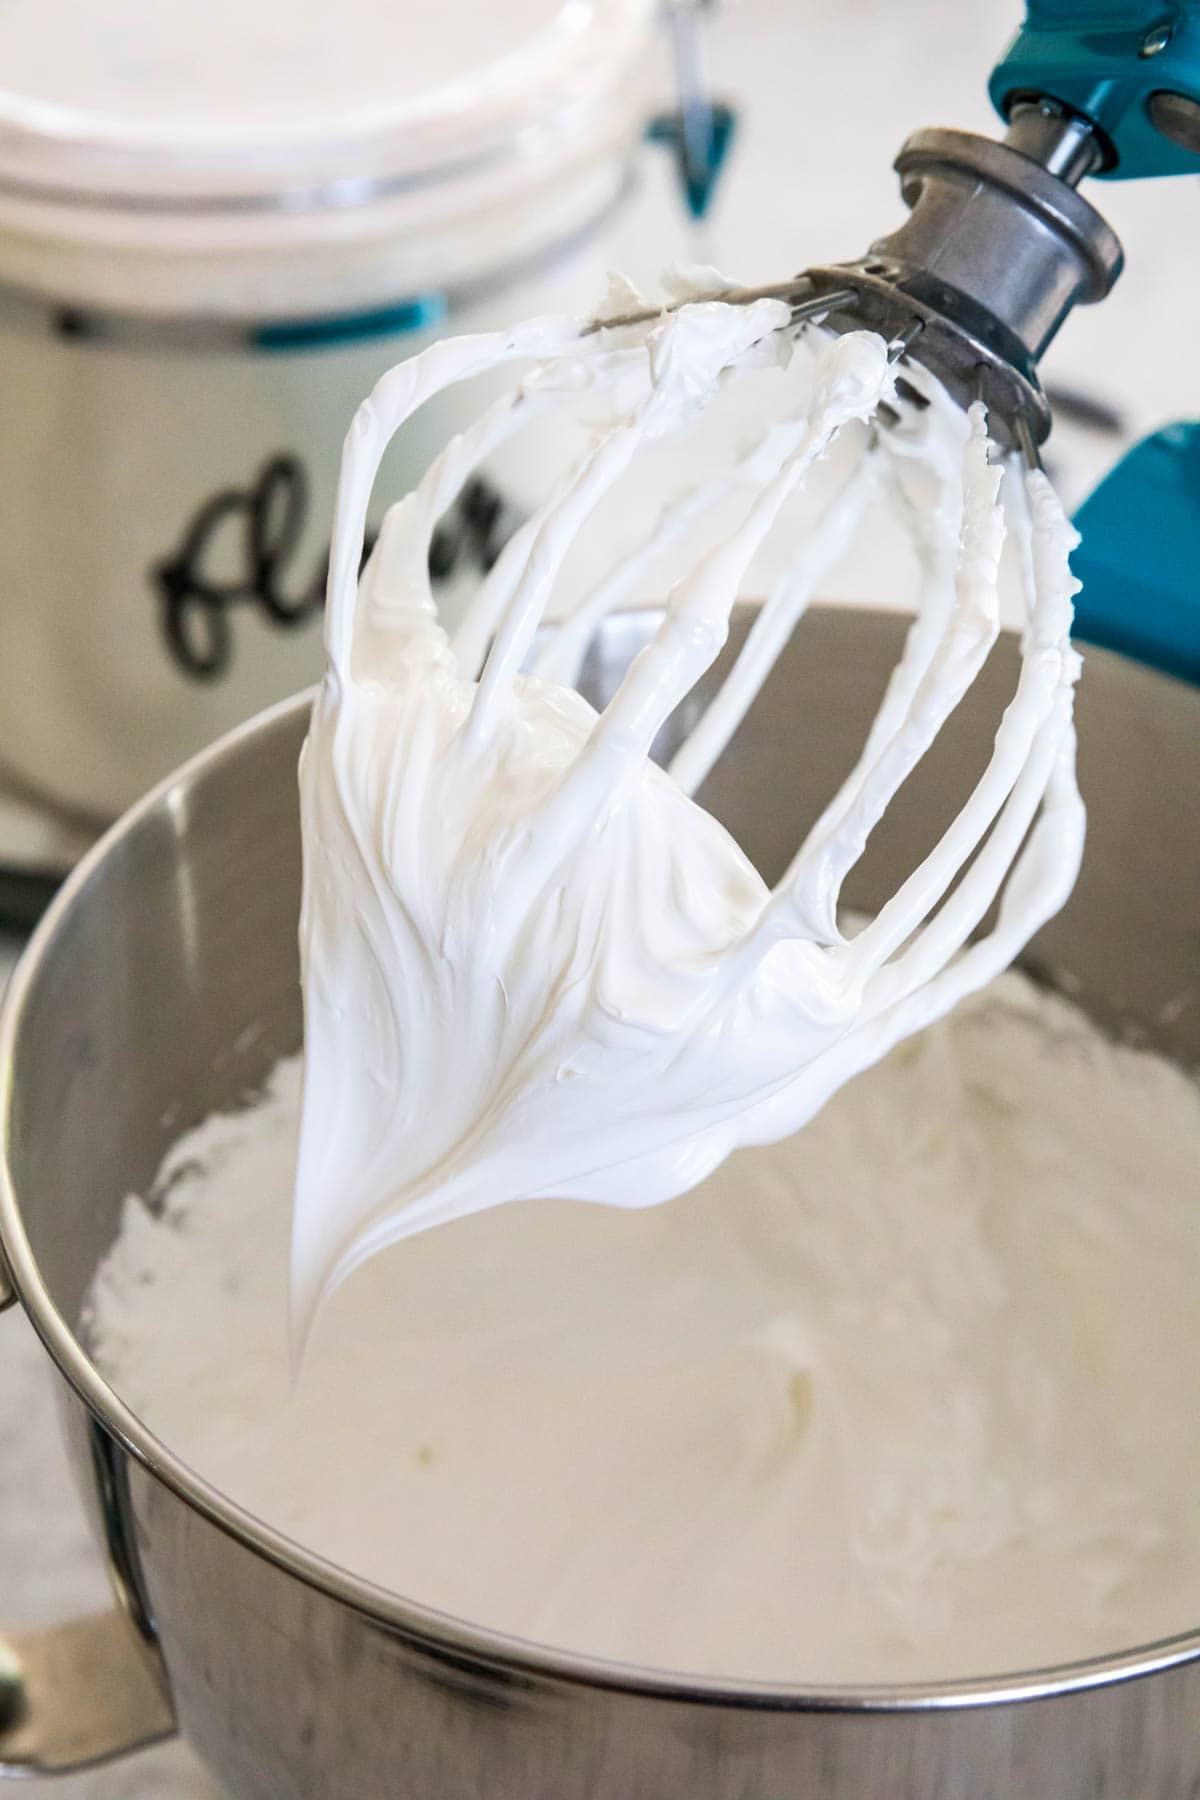 beater being lifted out of meringue to show stiff peaks